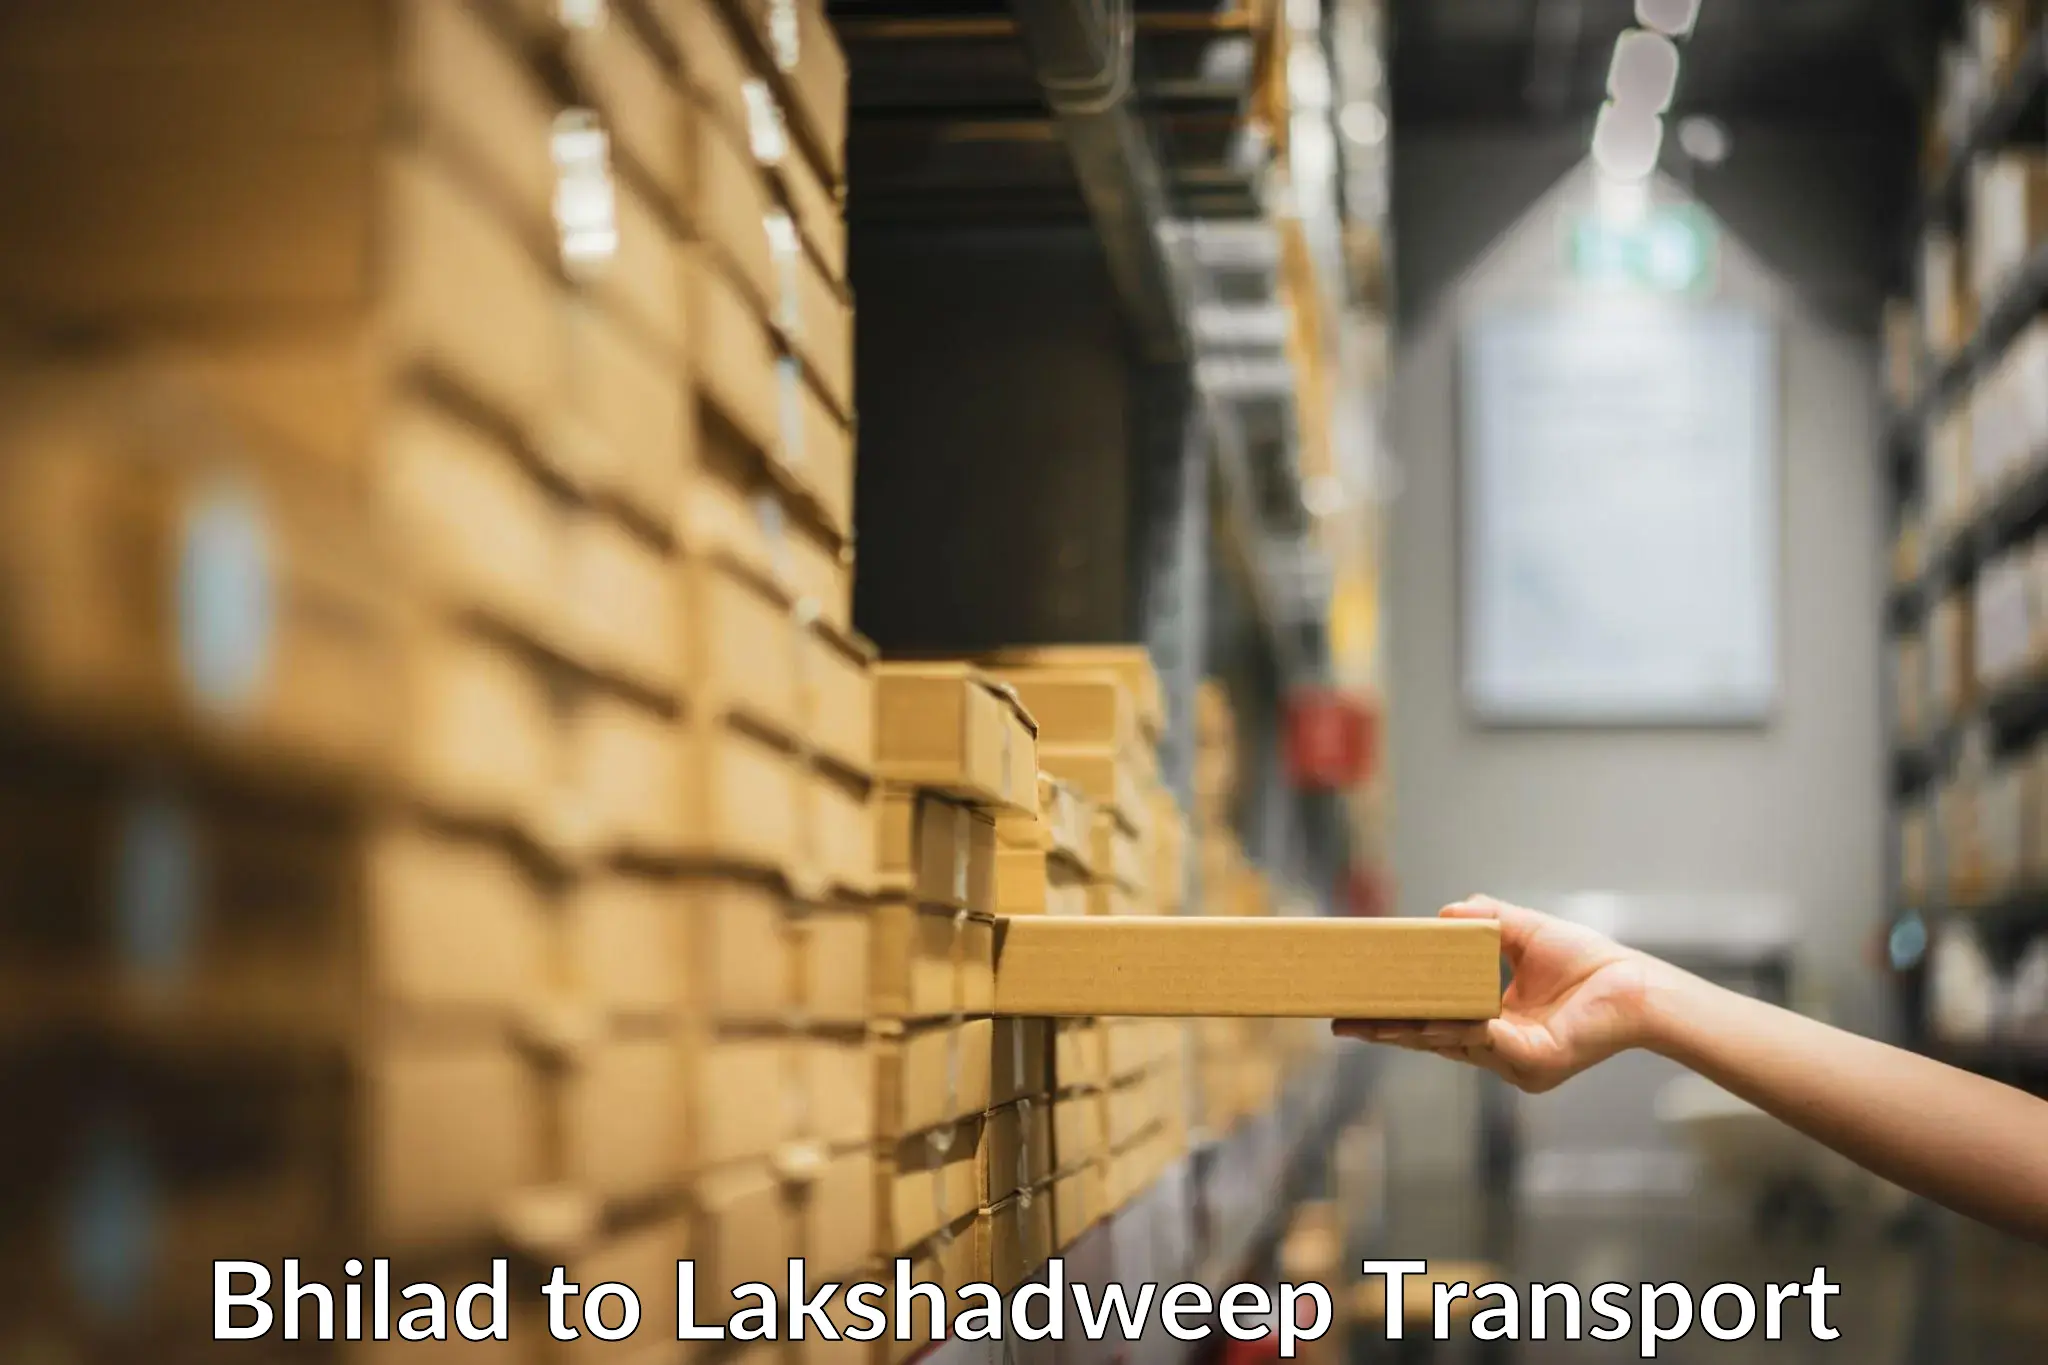 Commercial transport service Bhilad to Lakshadweep